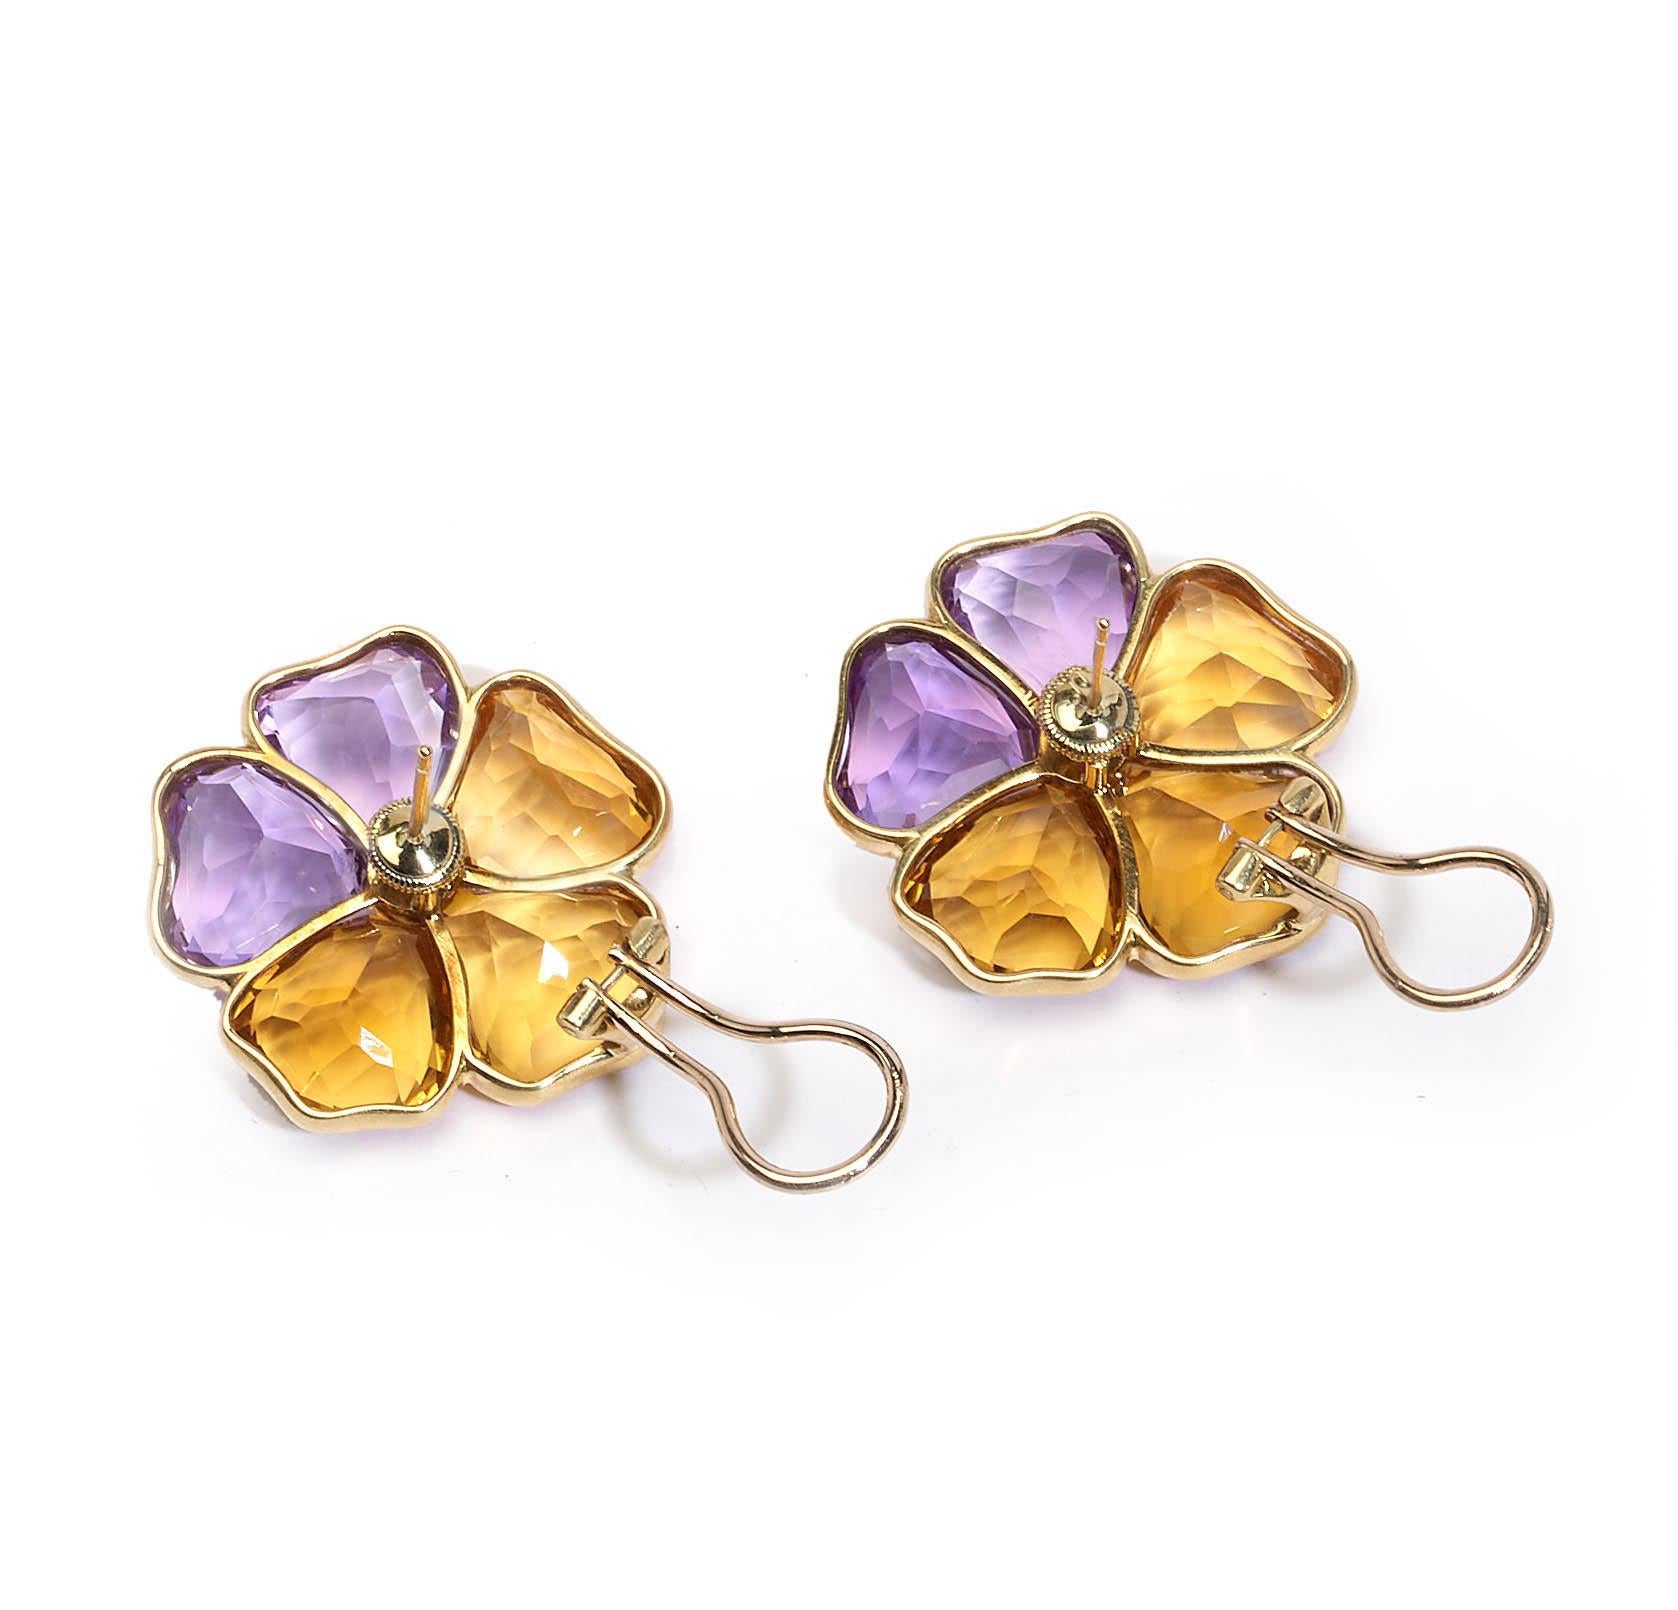 Round Cut Harvey & Gore Amethyst, Citrine, Diamond and Gold Pansy Earrings, 1973 For Sale